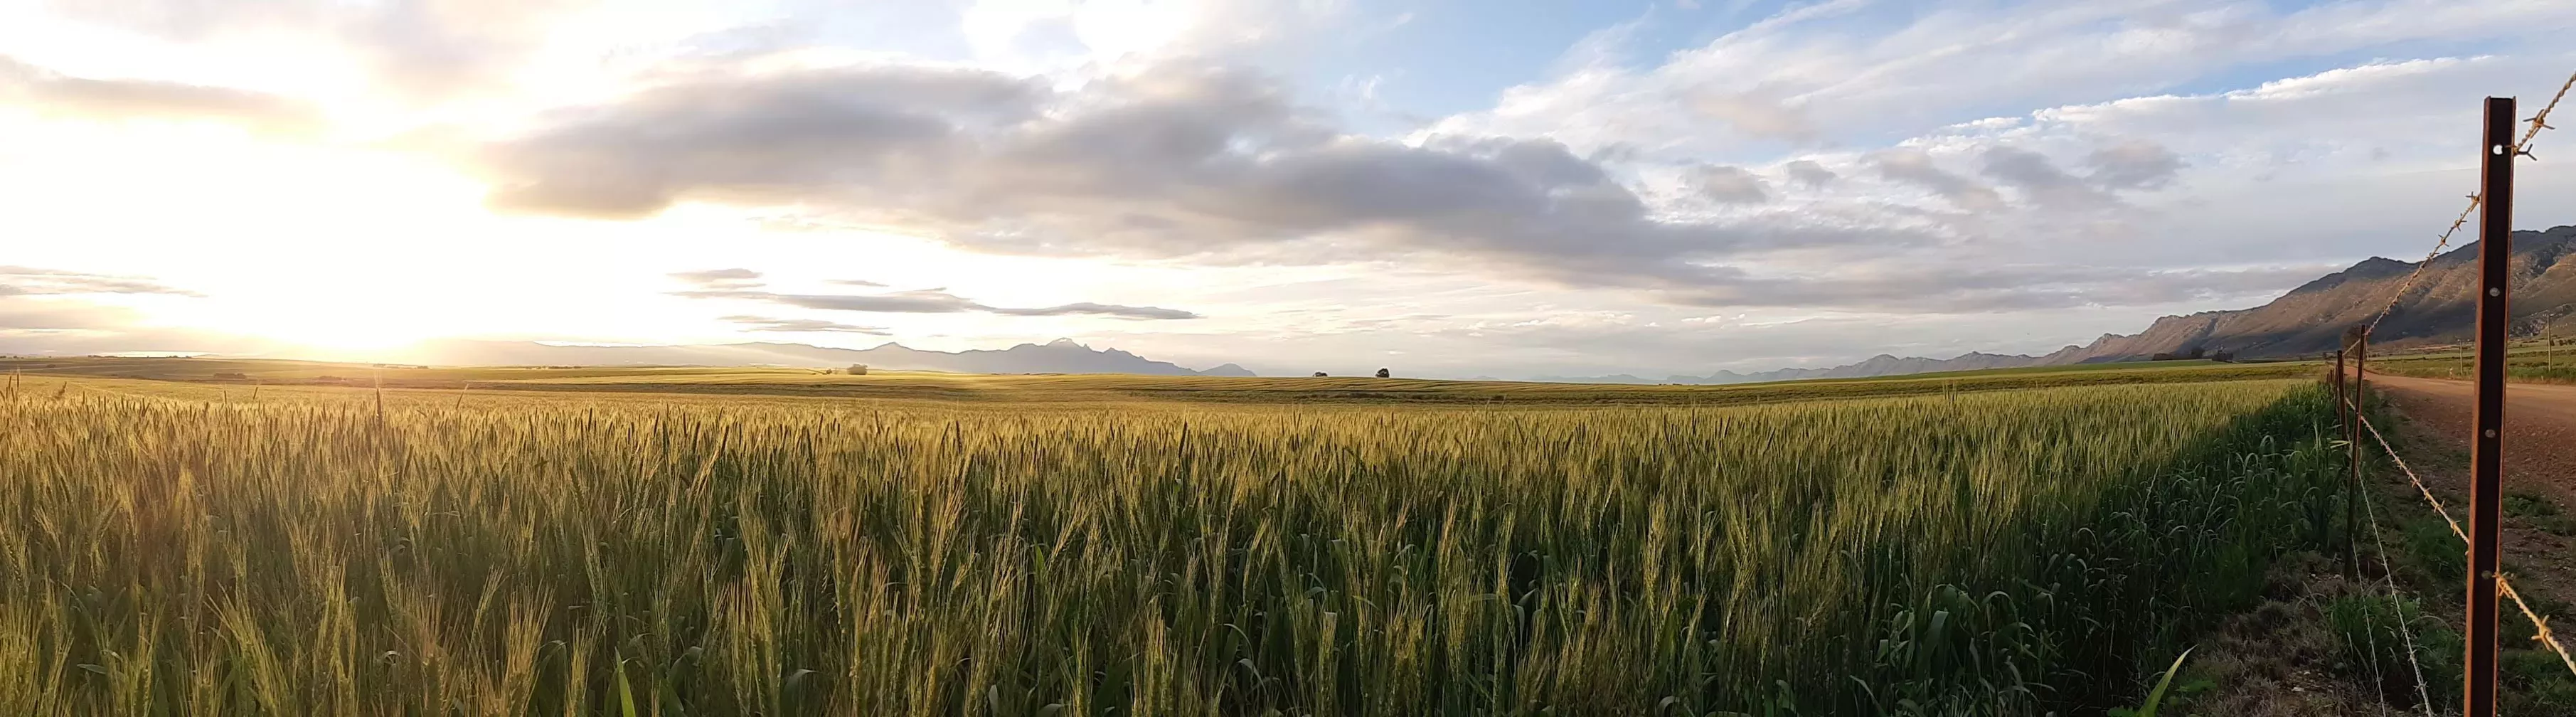 Very large field of young green wheat in South Africa. Far away in the background and on the right-hand side are mountains. The sun is setting which has created a bright dusky glow across the field.